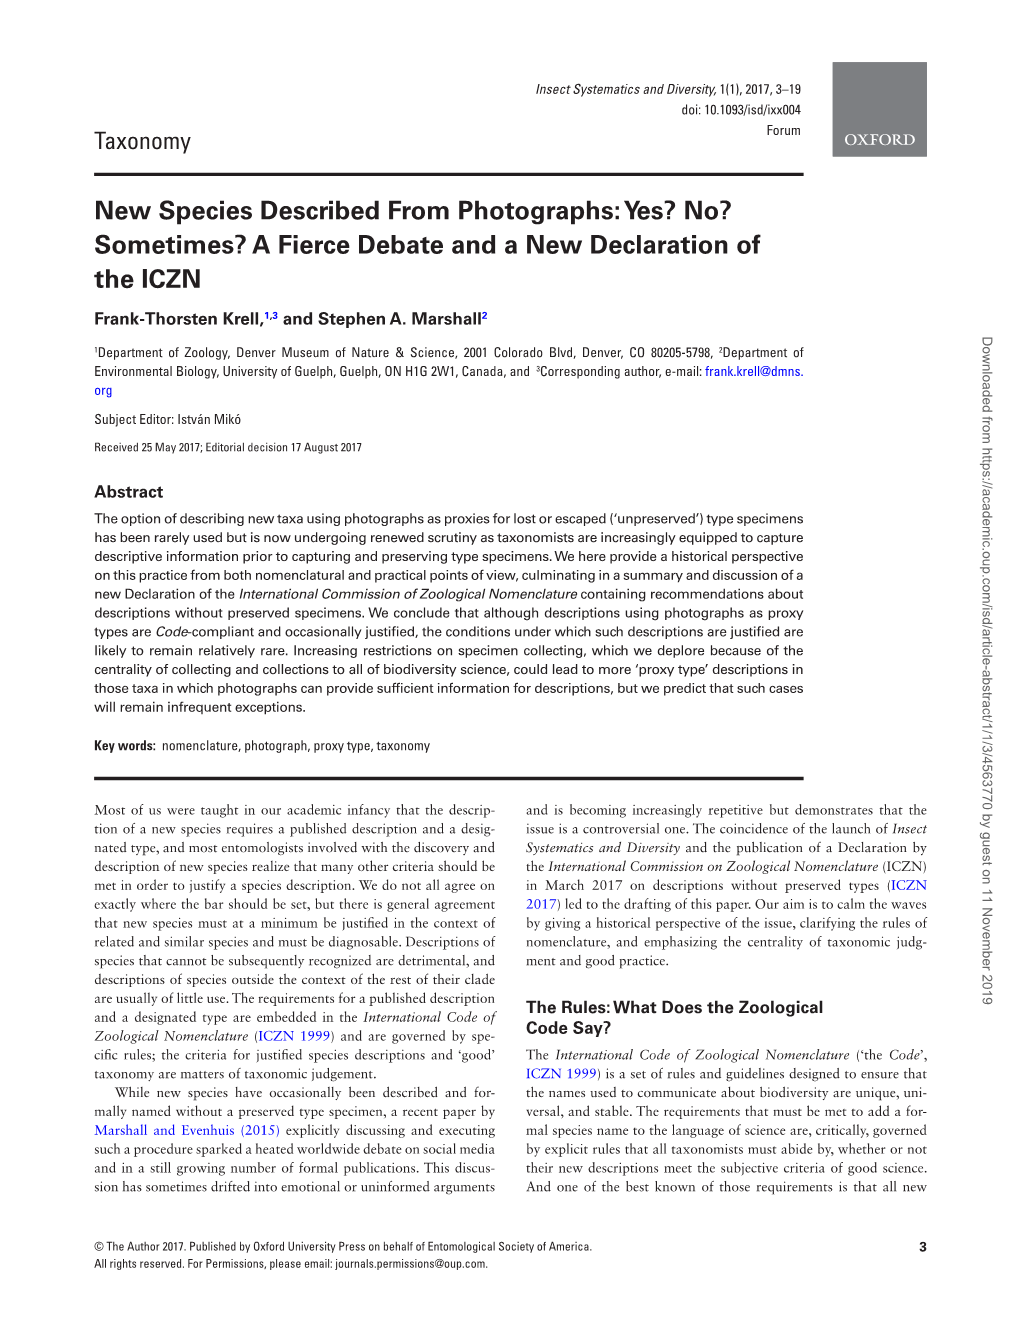 New Species Described from Photographs: Yes? No? Sometimes? a Fierce Debate and a New Declaration of the ICZN